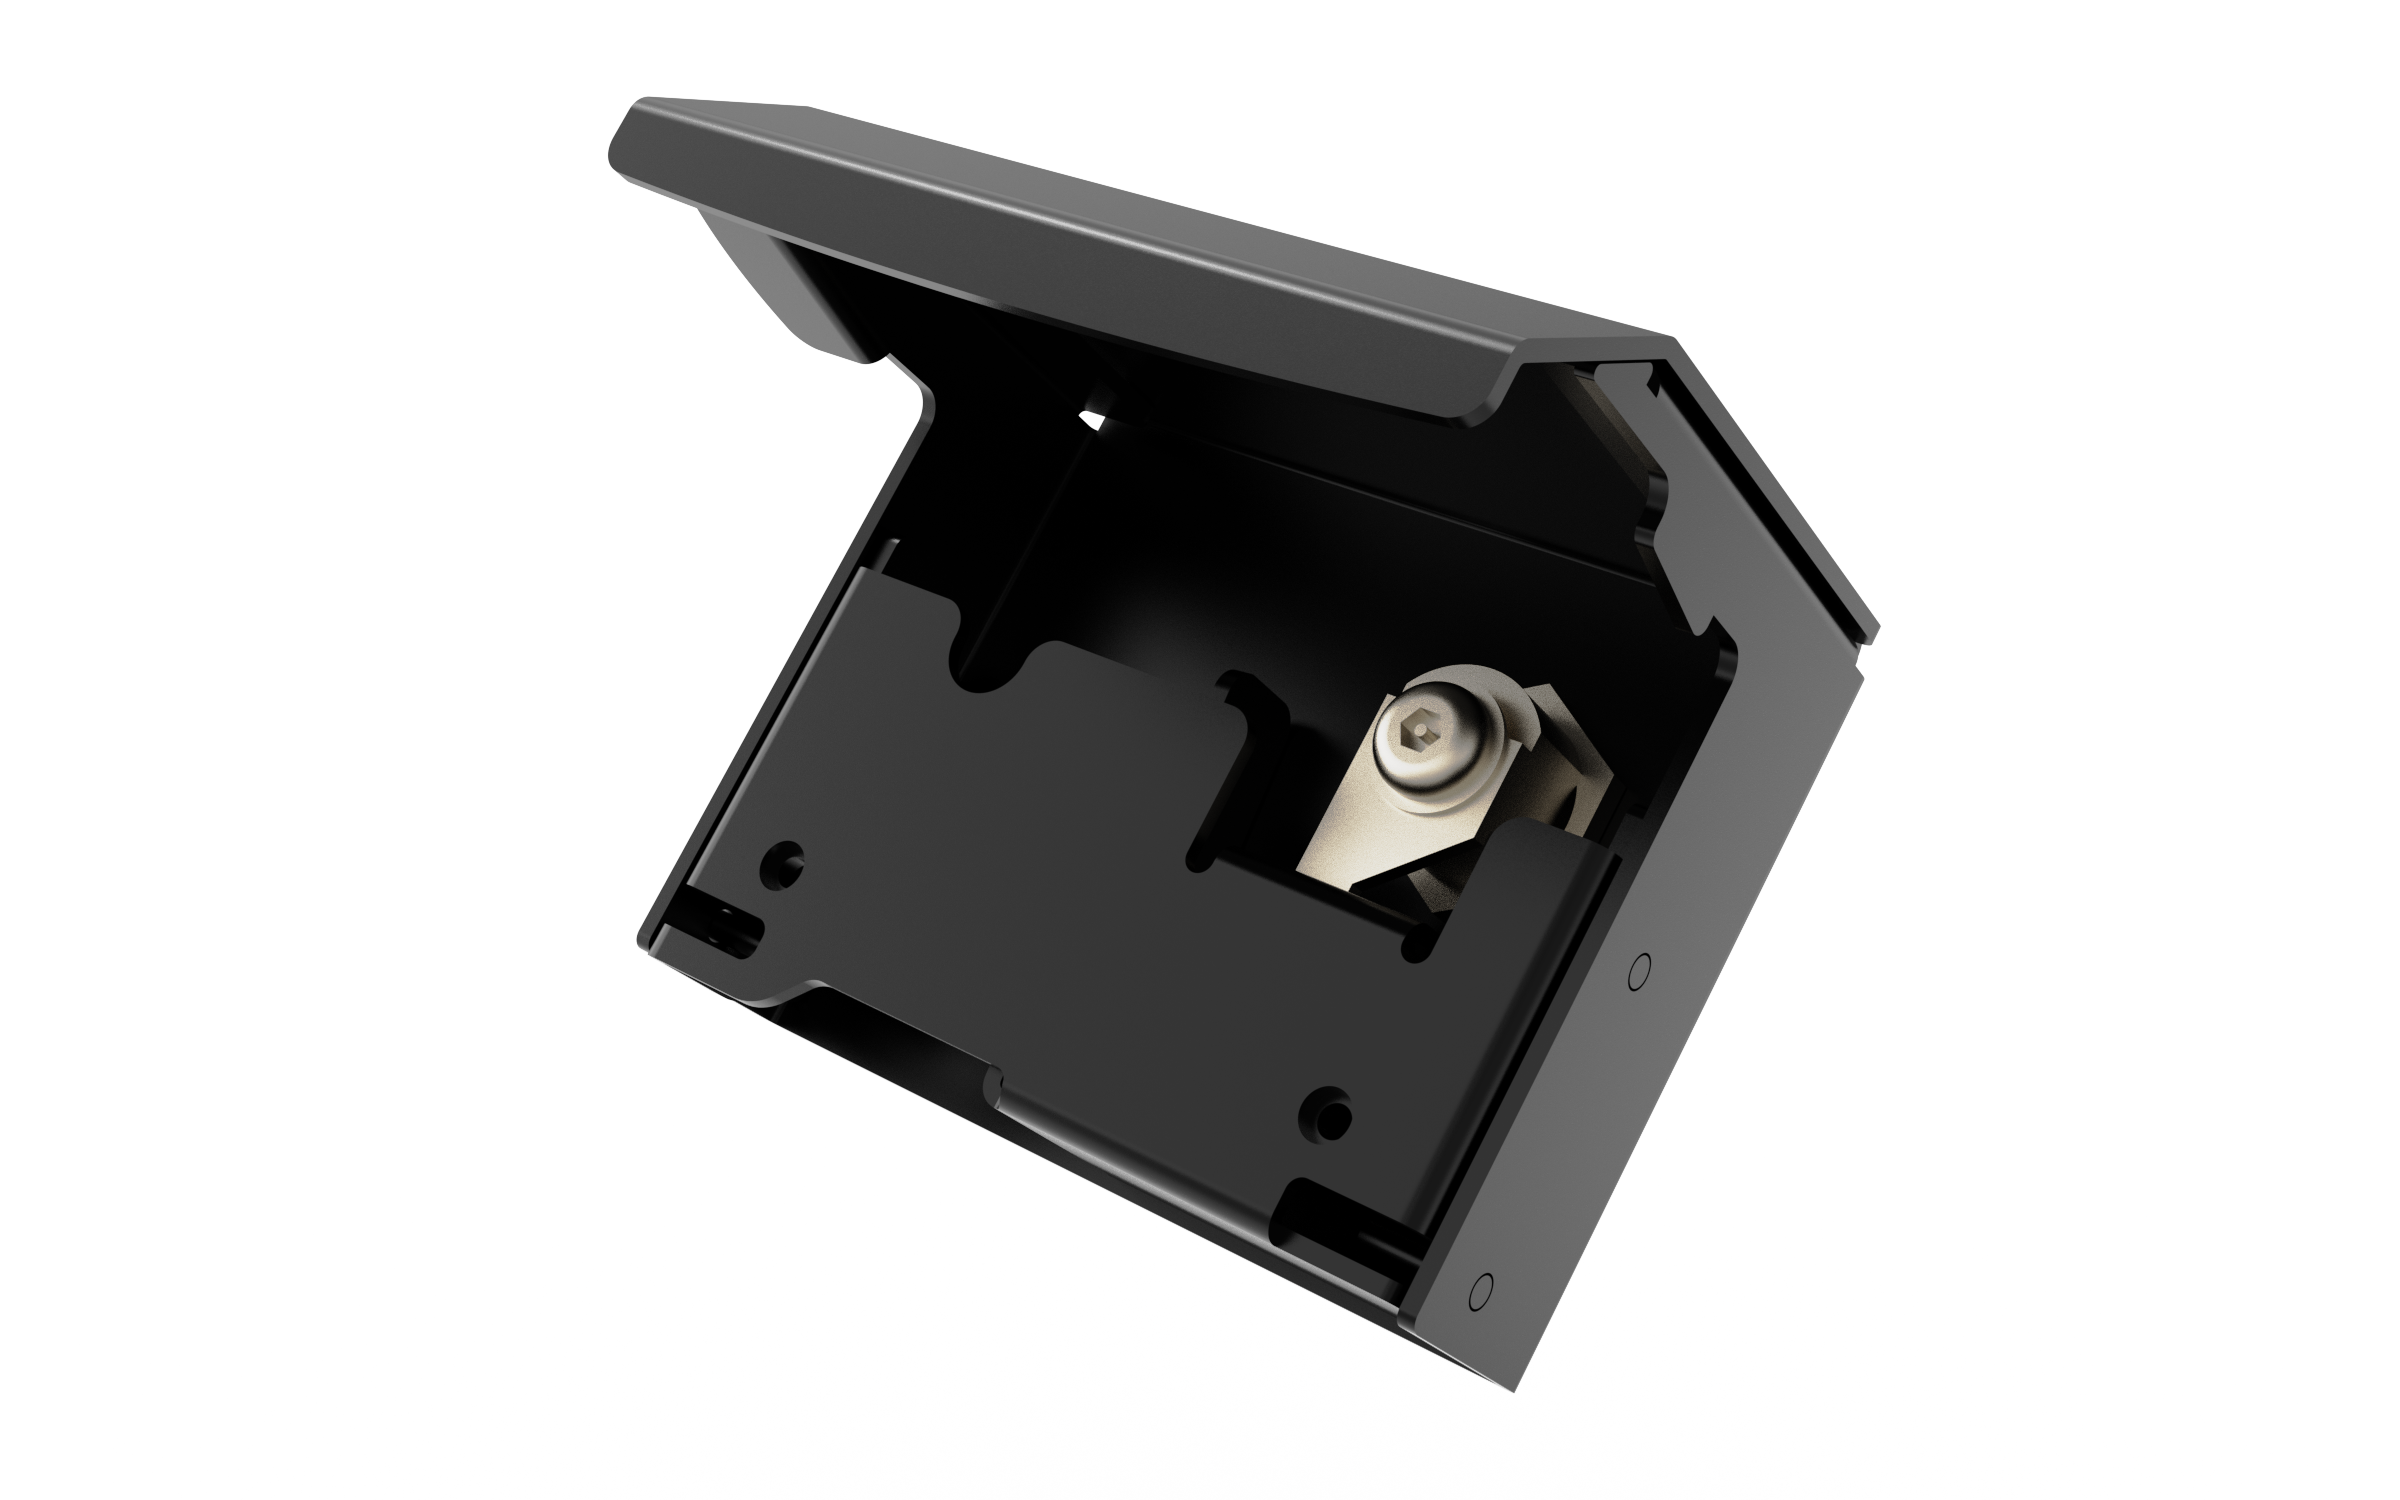 Rear Locking Add-On Kit for Verifone MX915 Payment Terminals